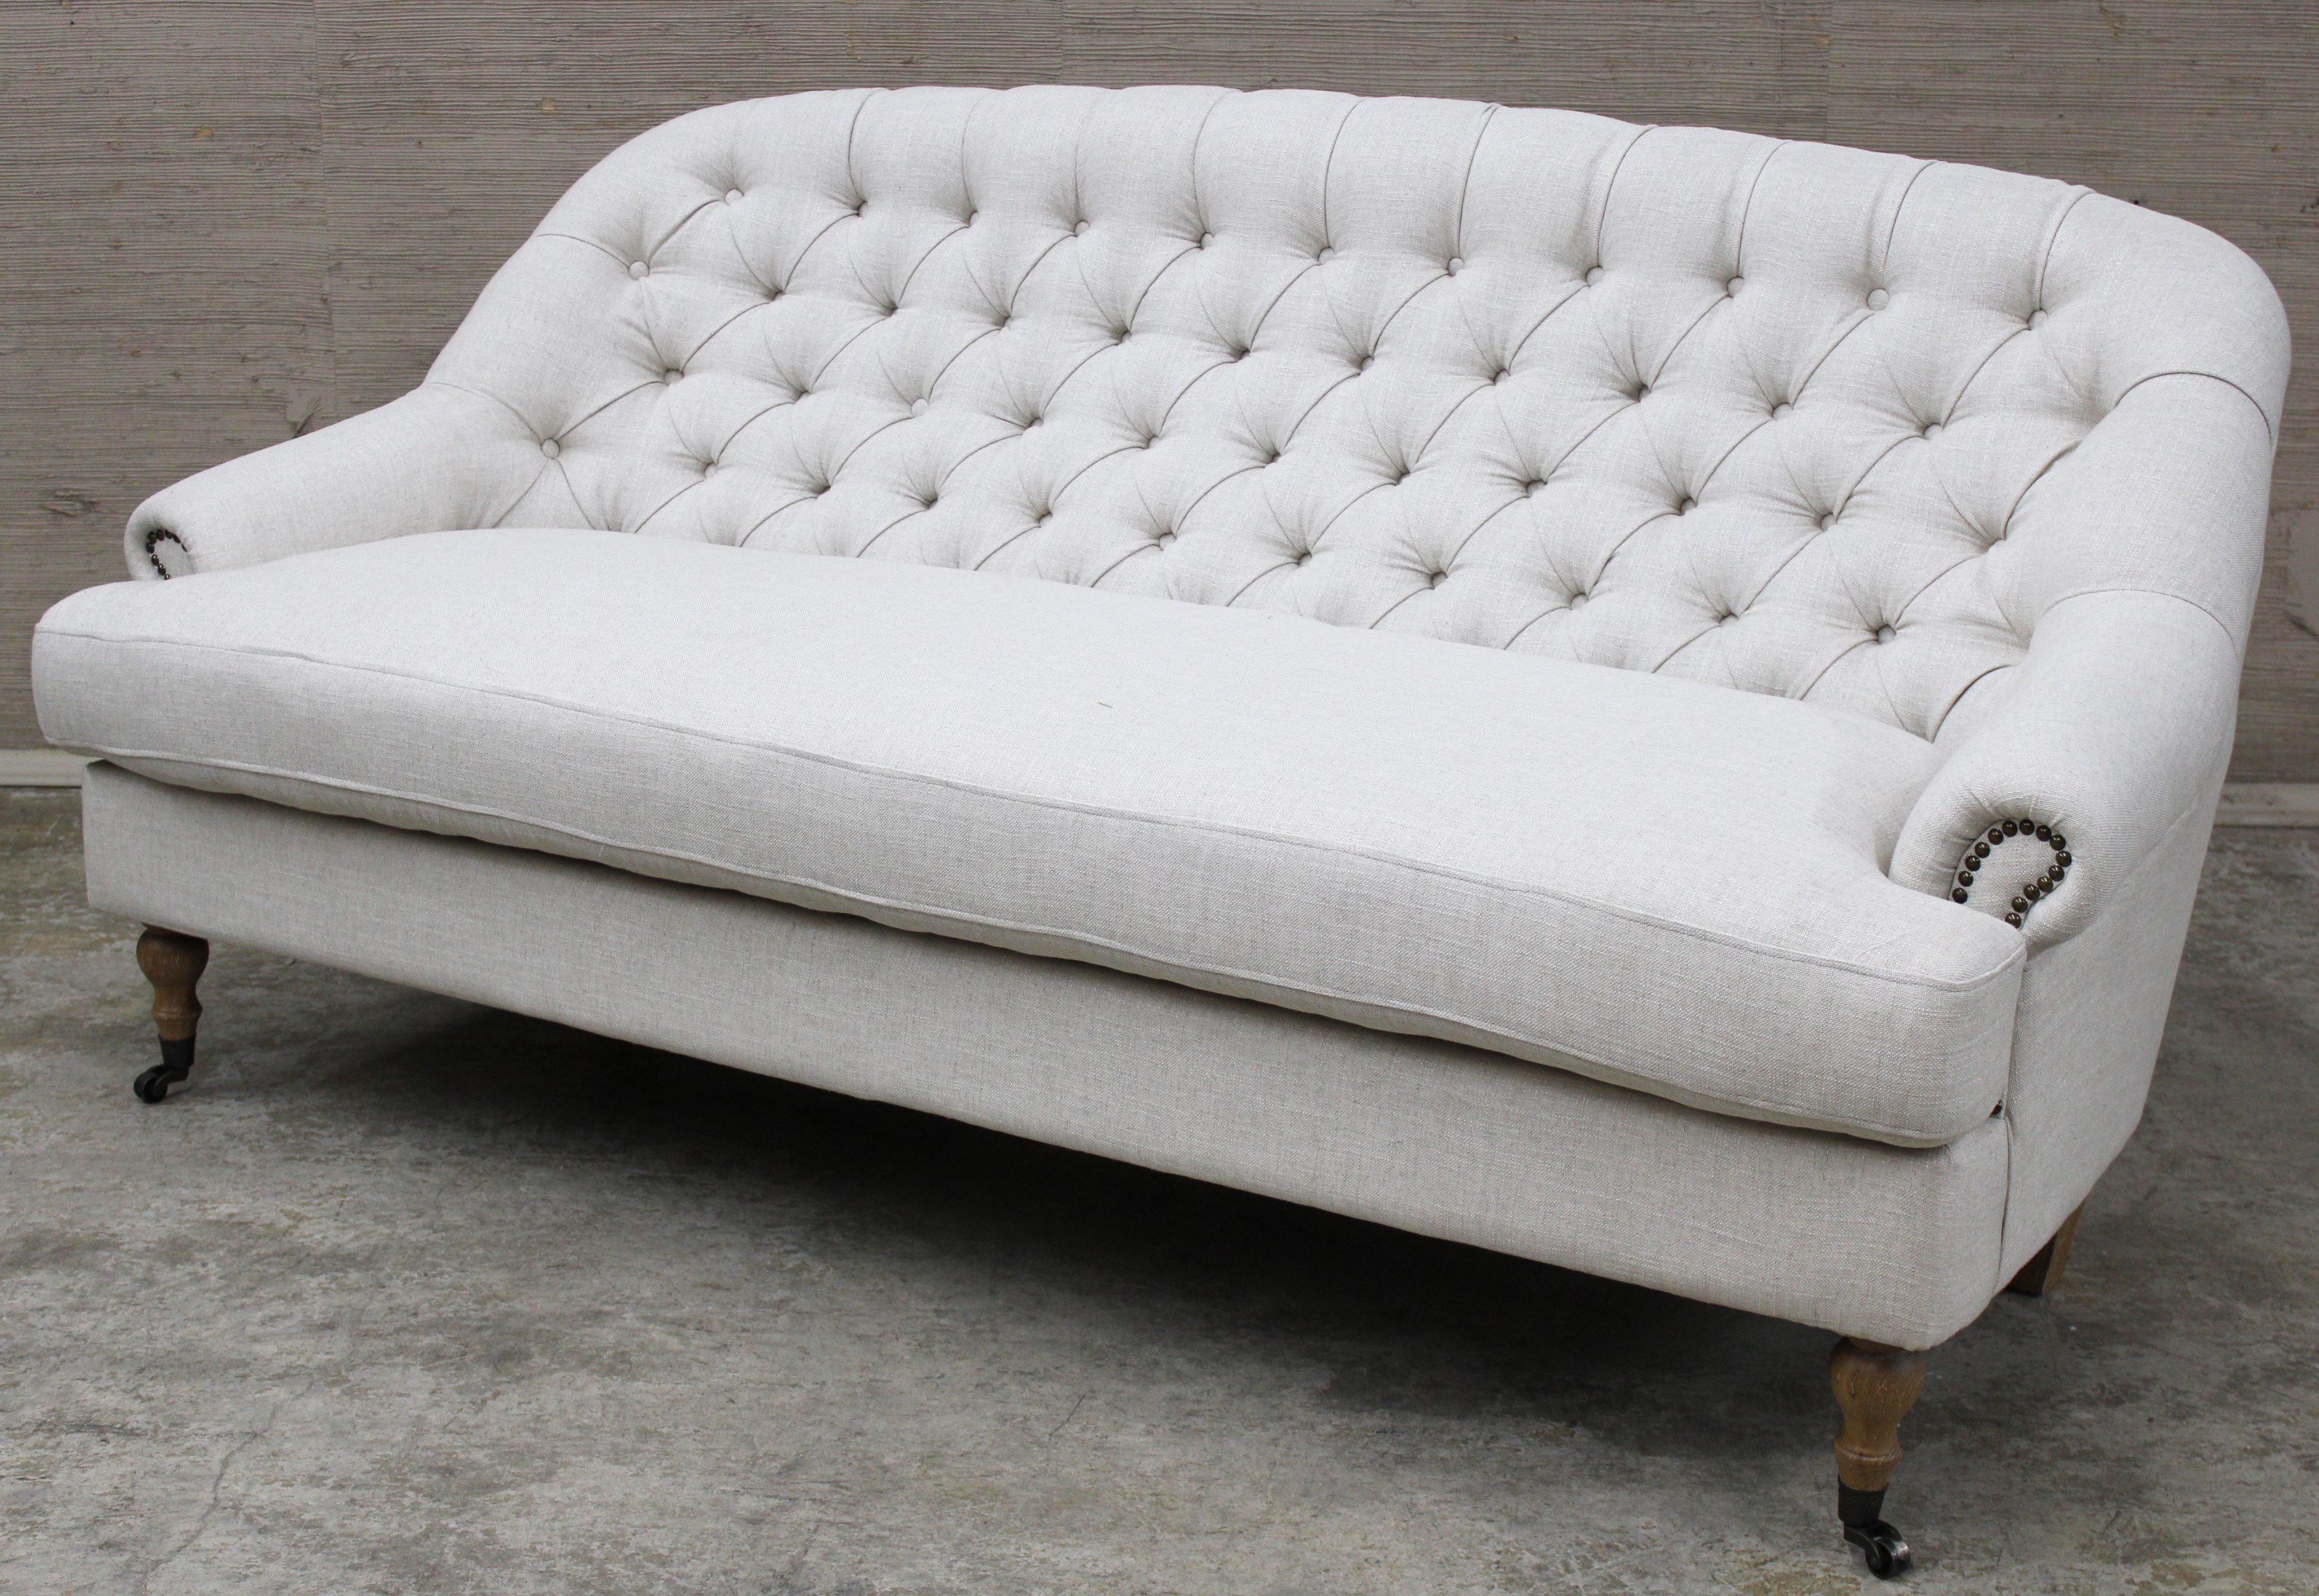 UPHOLSTERED SCROLL ARM SOFA Tufted